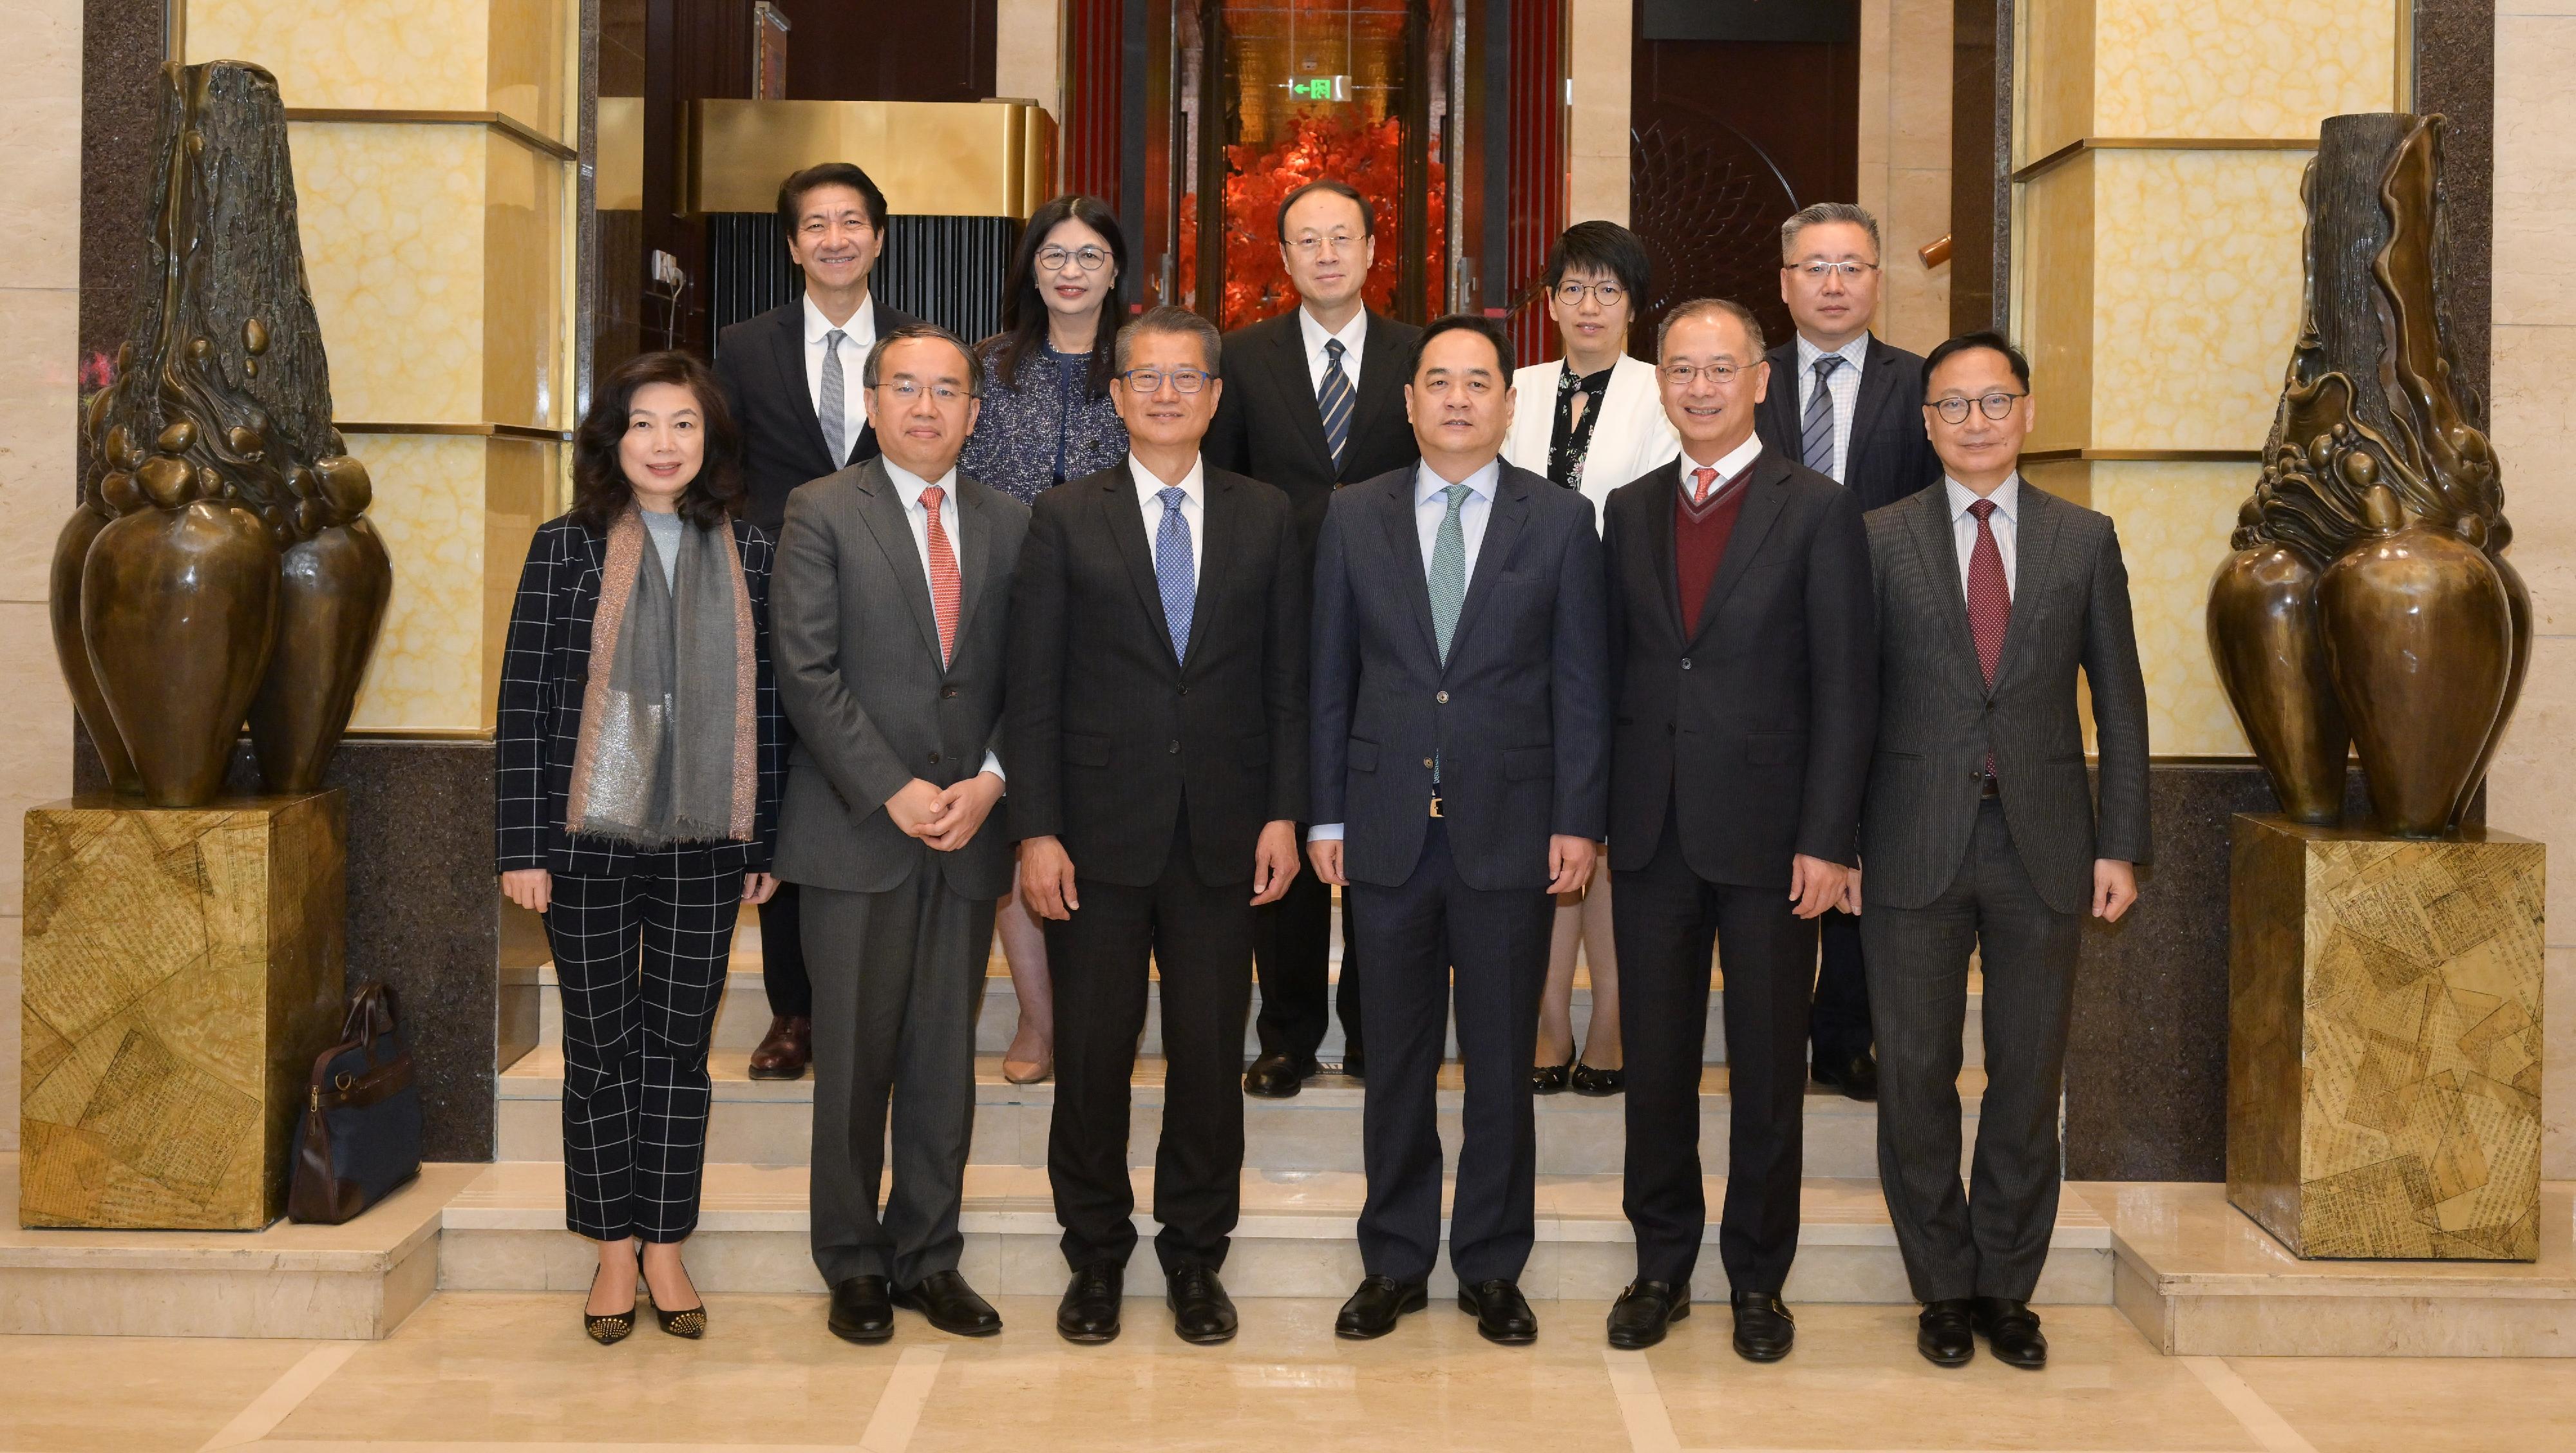 The Financial Secretary, Mr Paul Chan (front row, third left), concluded his visit to Beijing today (April 21). Accompanied by the Secretary for Financial Services and the Treasury, Mr Christopher Hui (front row, second left), Mr Chan called on Deputy Director of the Hong Kong and Macao Affairs Office of the State Council Mr Yang Wanming (front row, third right). The Permanent Secretary for Financial Services and the Treasury (Financial Services), Ms Salina Yan (front row, first left); the Chief Executive of the Hong Kong Monetary Authority, Mr Eddie Yue (front row, second right); the Chief Executive Officer of the Securities and Futures Commission, Ms Julia Leung (back row, second left); and the Chief Executive Officer of the Insurance Authority, Mr Clement Cheung (front row, first right), also attended.